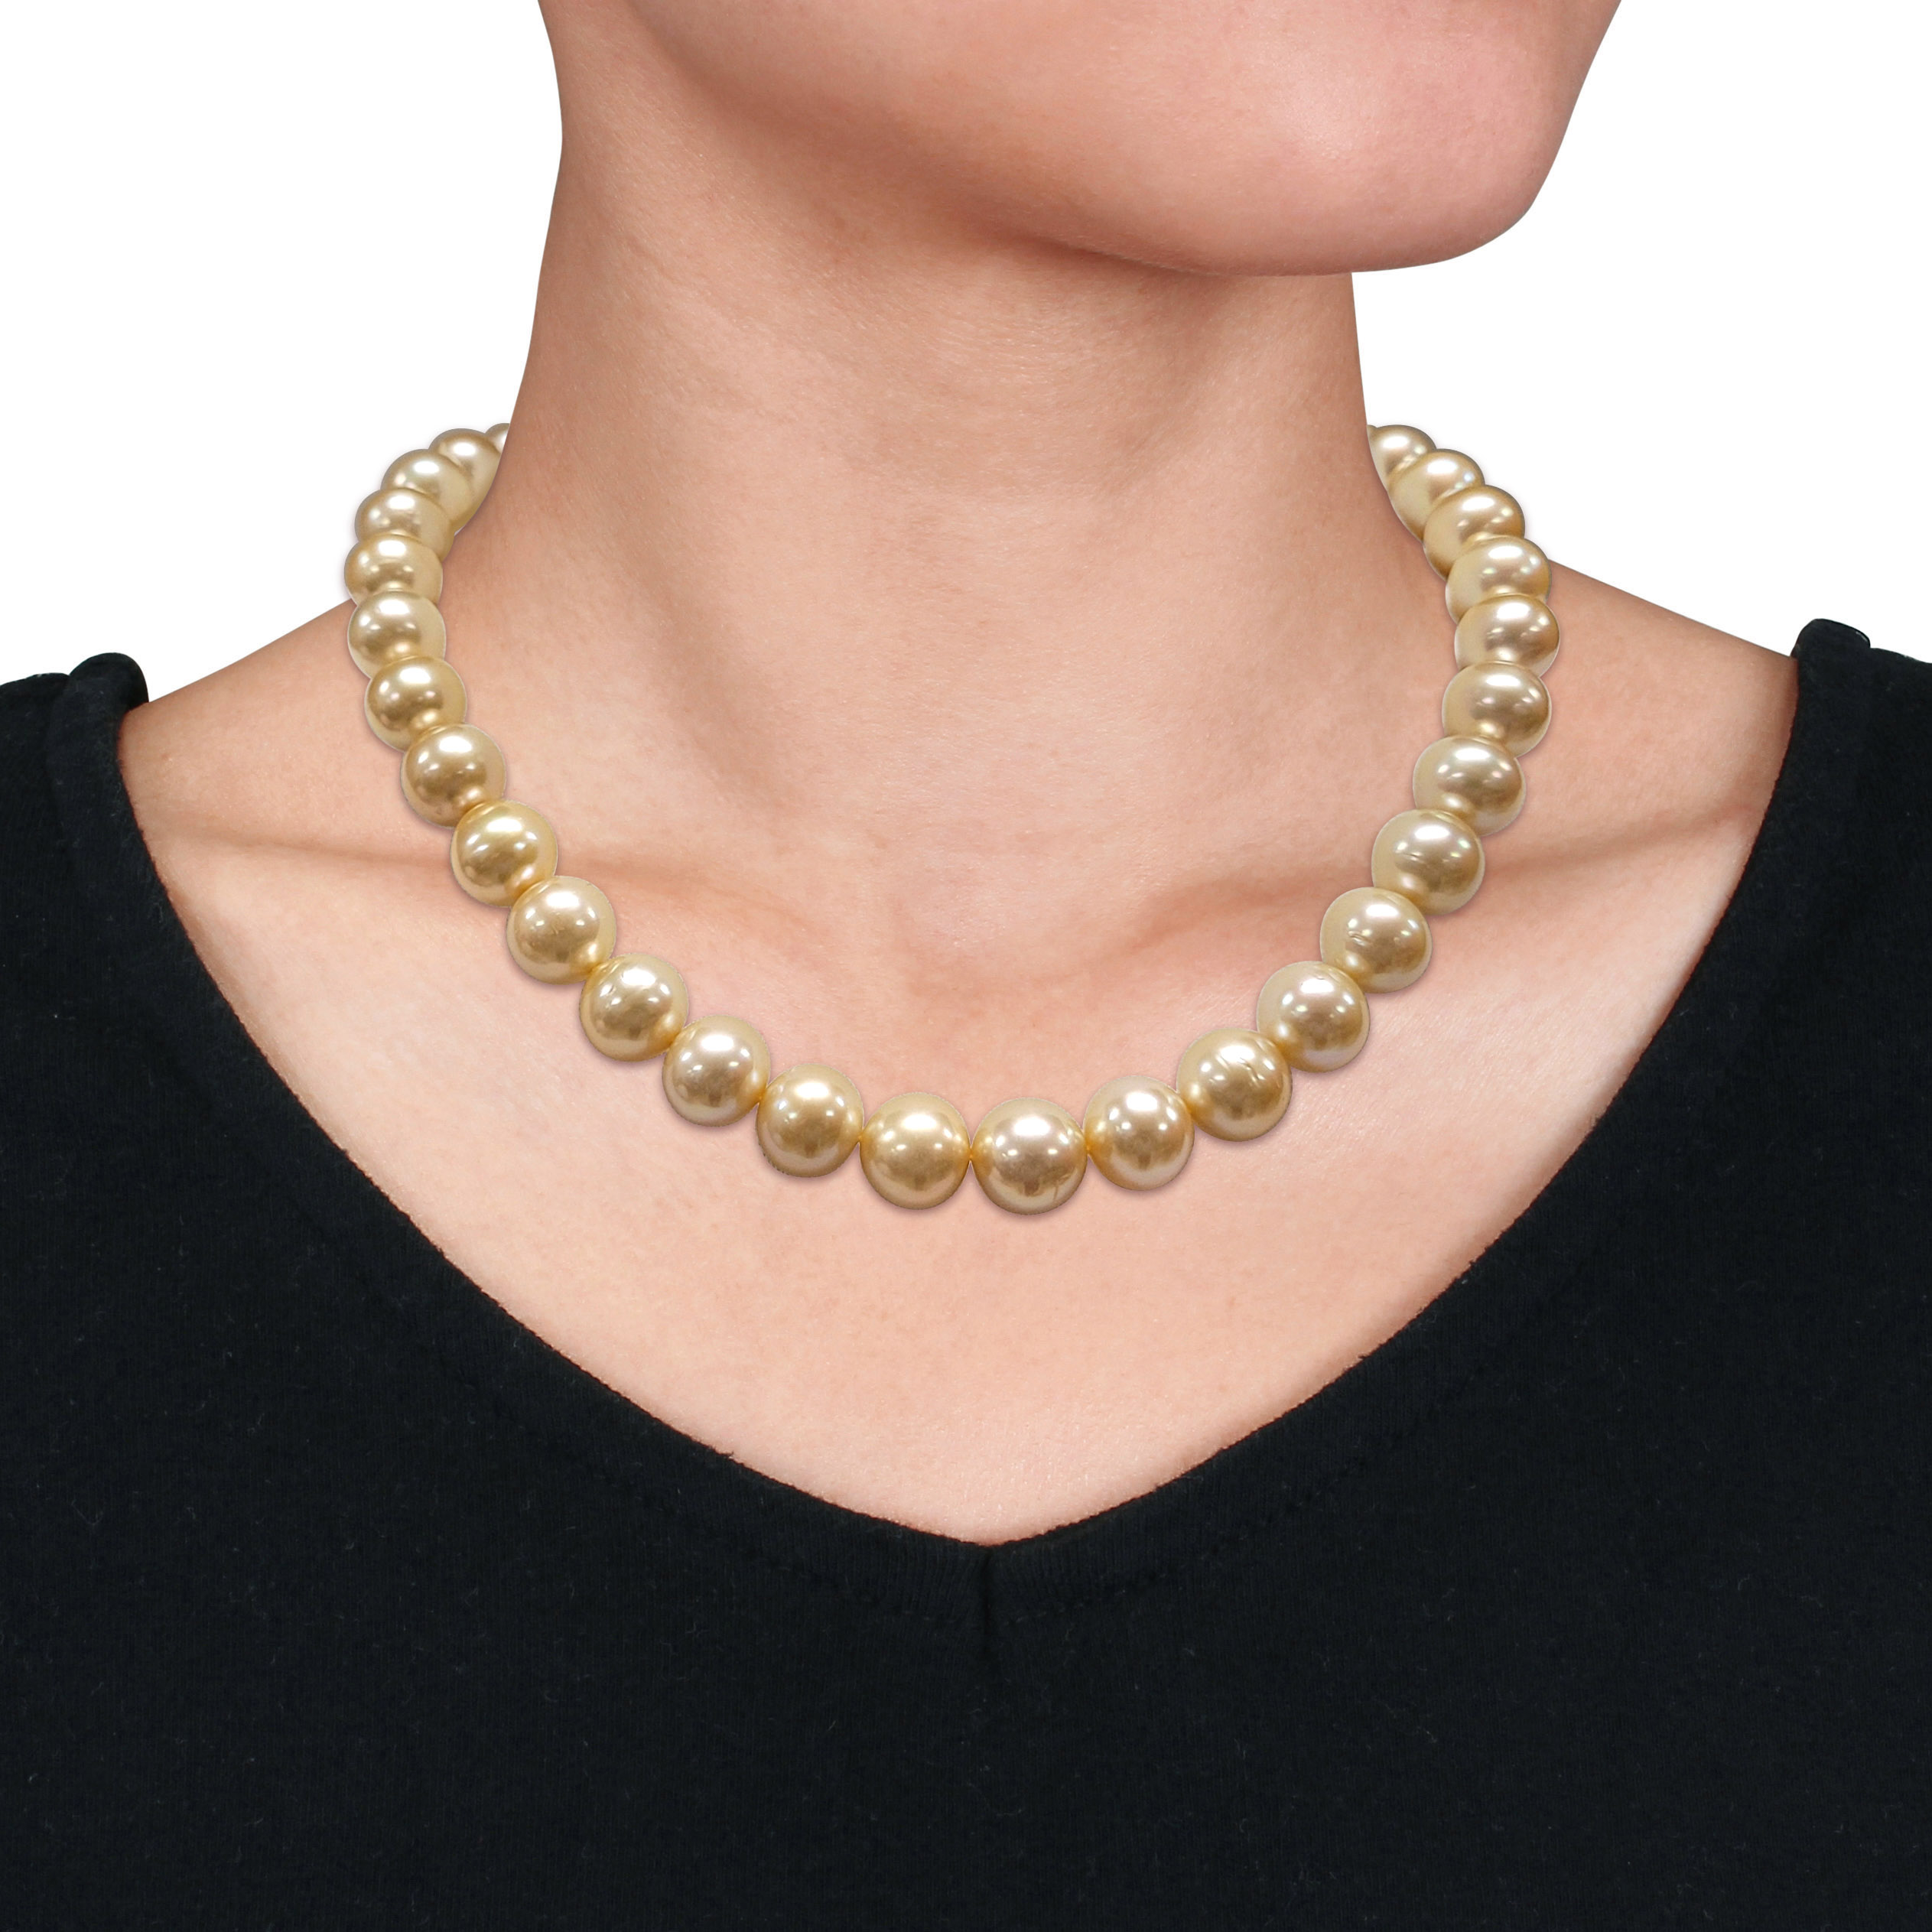 12-13 MM Golden South Sea Cultured Pearl Strand Necklace with 14k Yellow Gold Diamond Accent Ball Clasp - 18 in